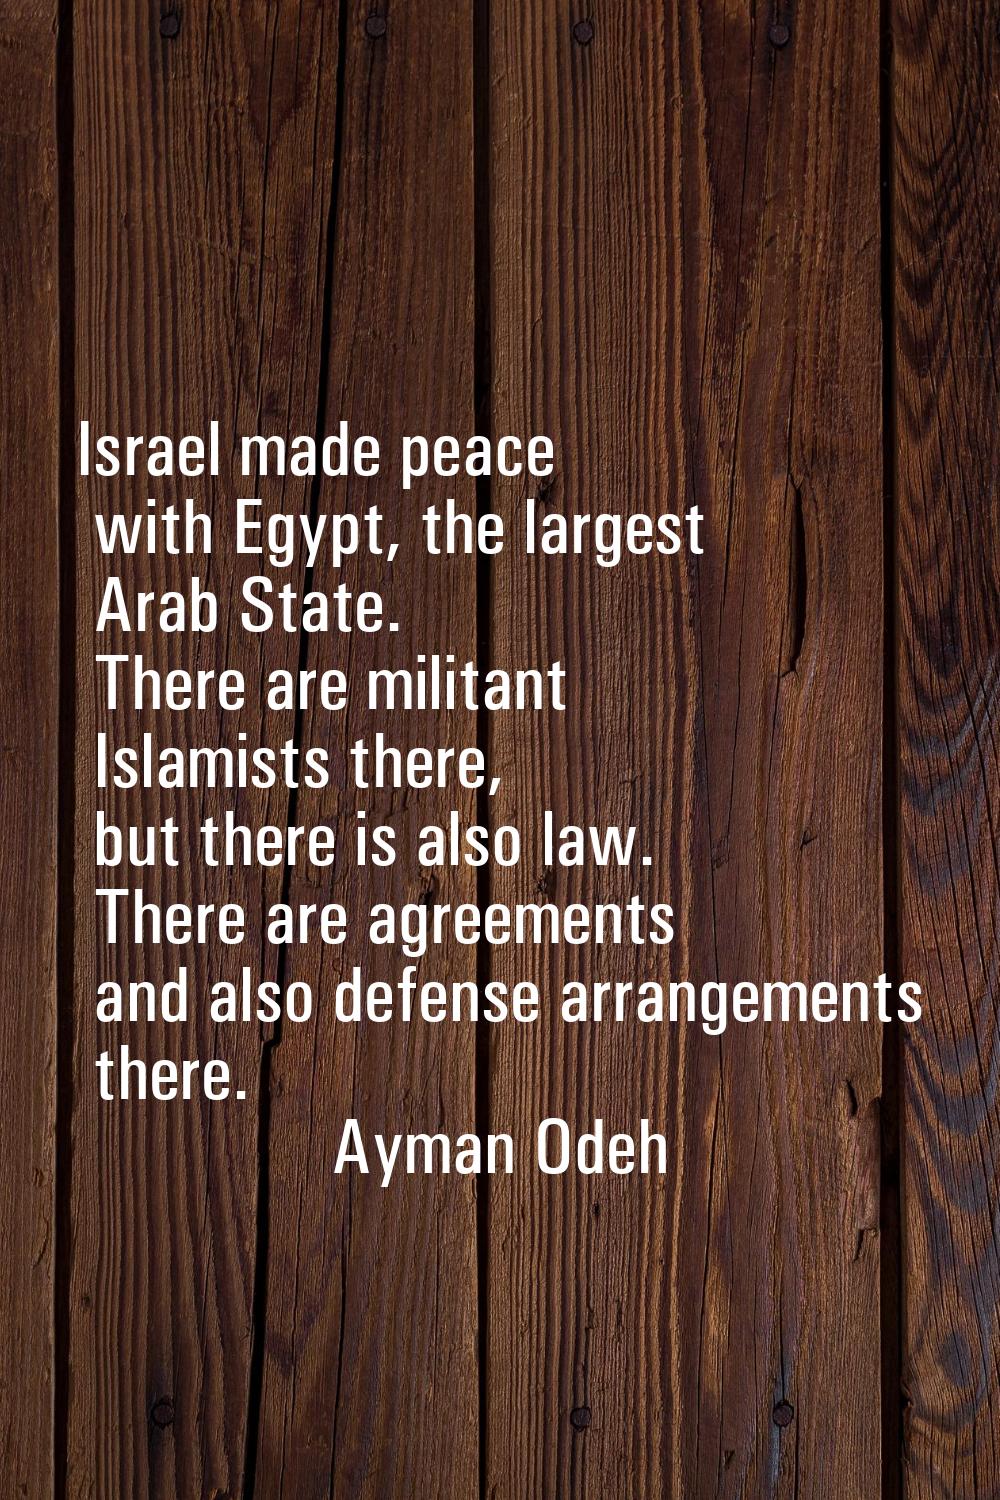 Israel made peace with Egypt, the largest Arab State. There are militant Islamists there, but there